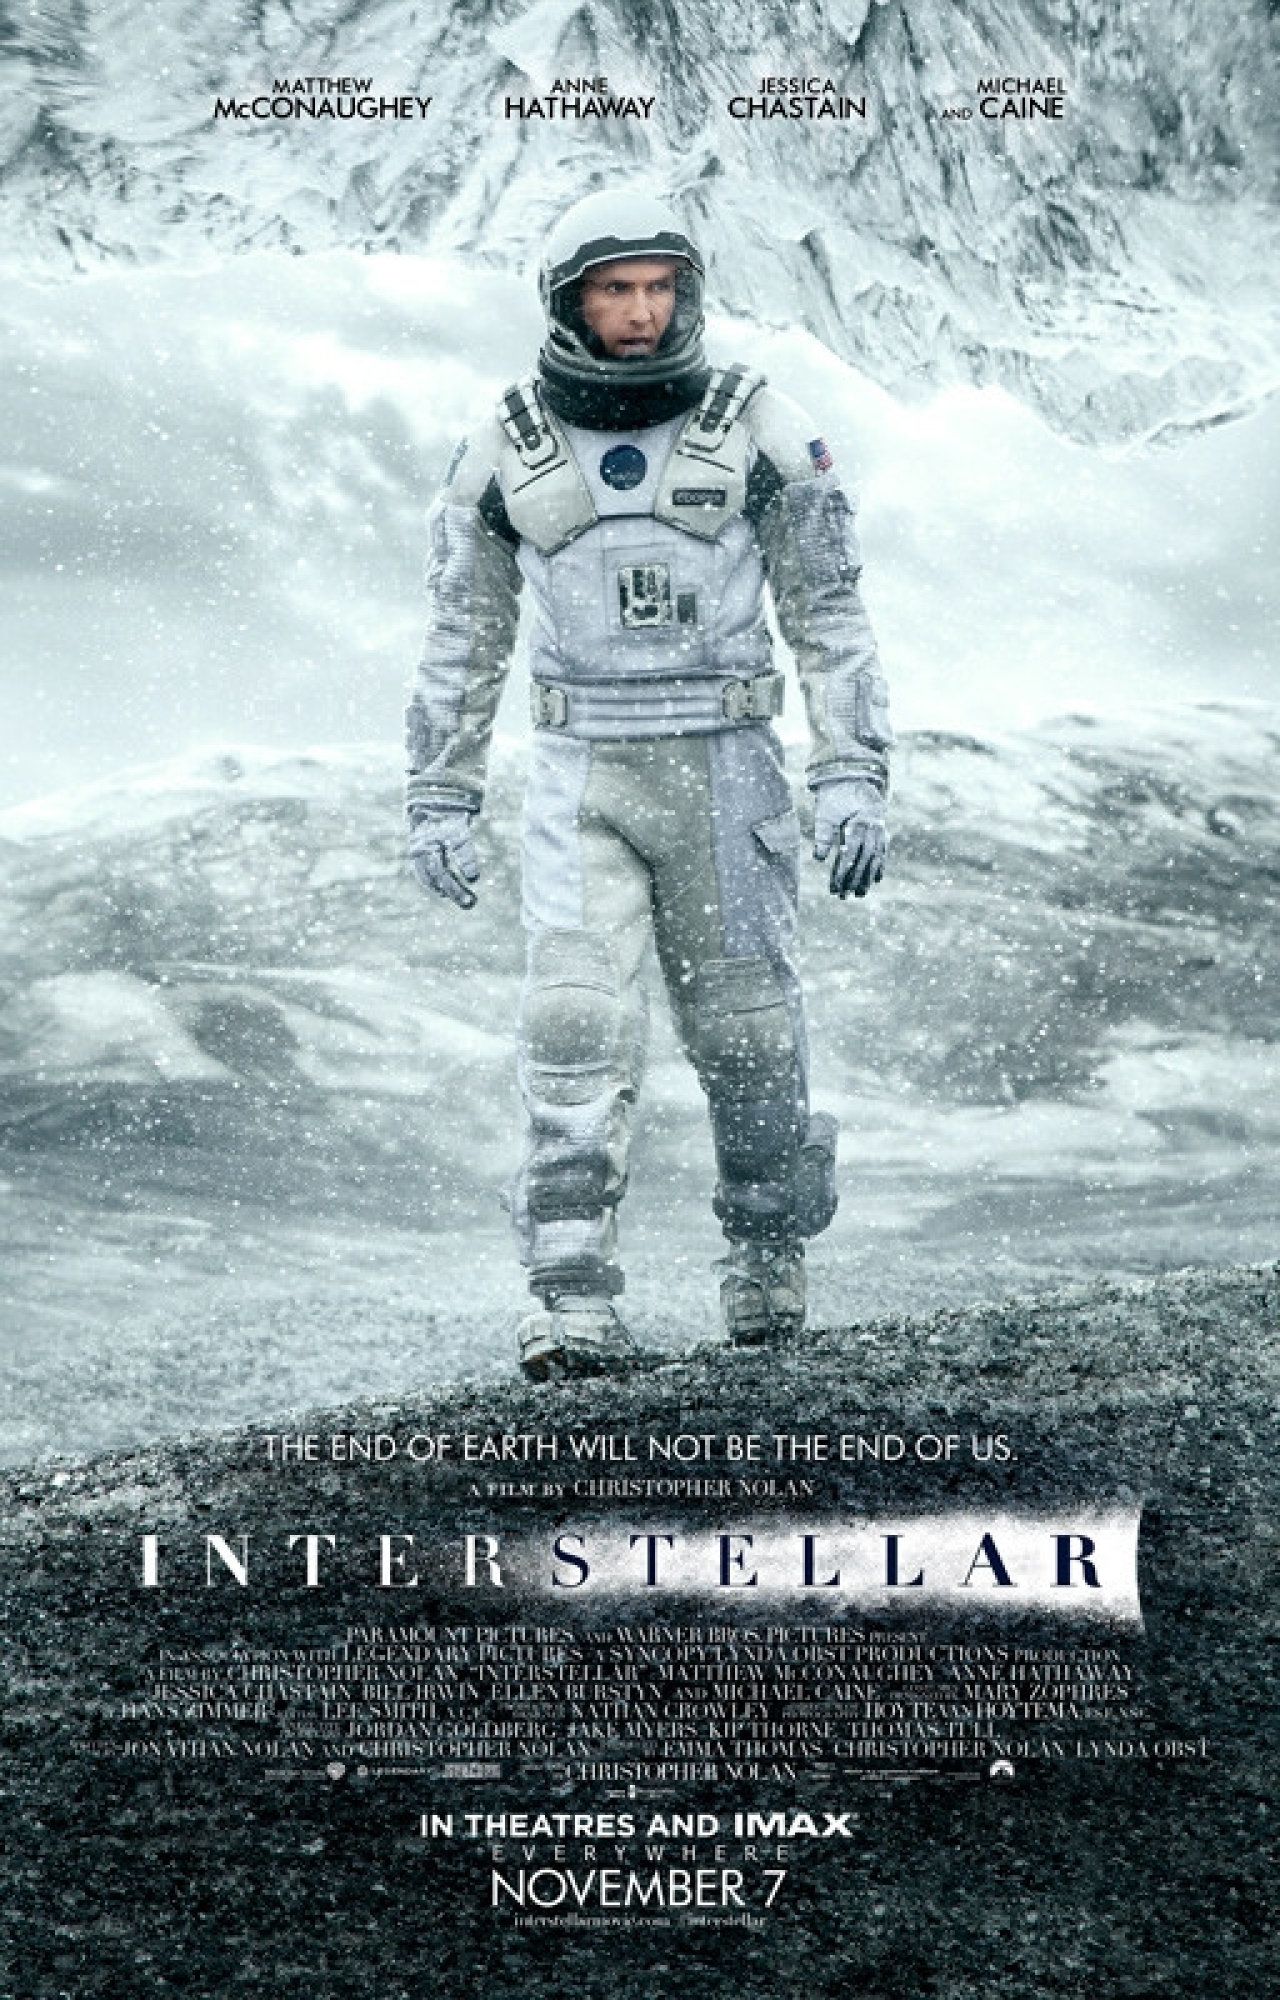 A poster for the movie "Interstellar." Viewers at London's IMAX are able to use virtual reality headset Oculus Rift to explore the spaceship.